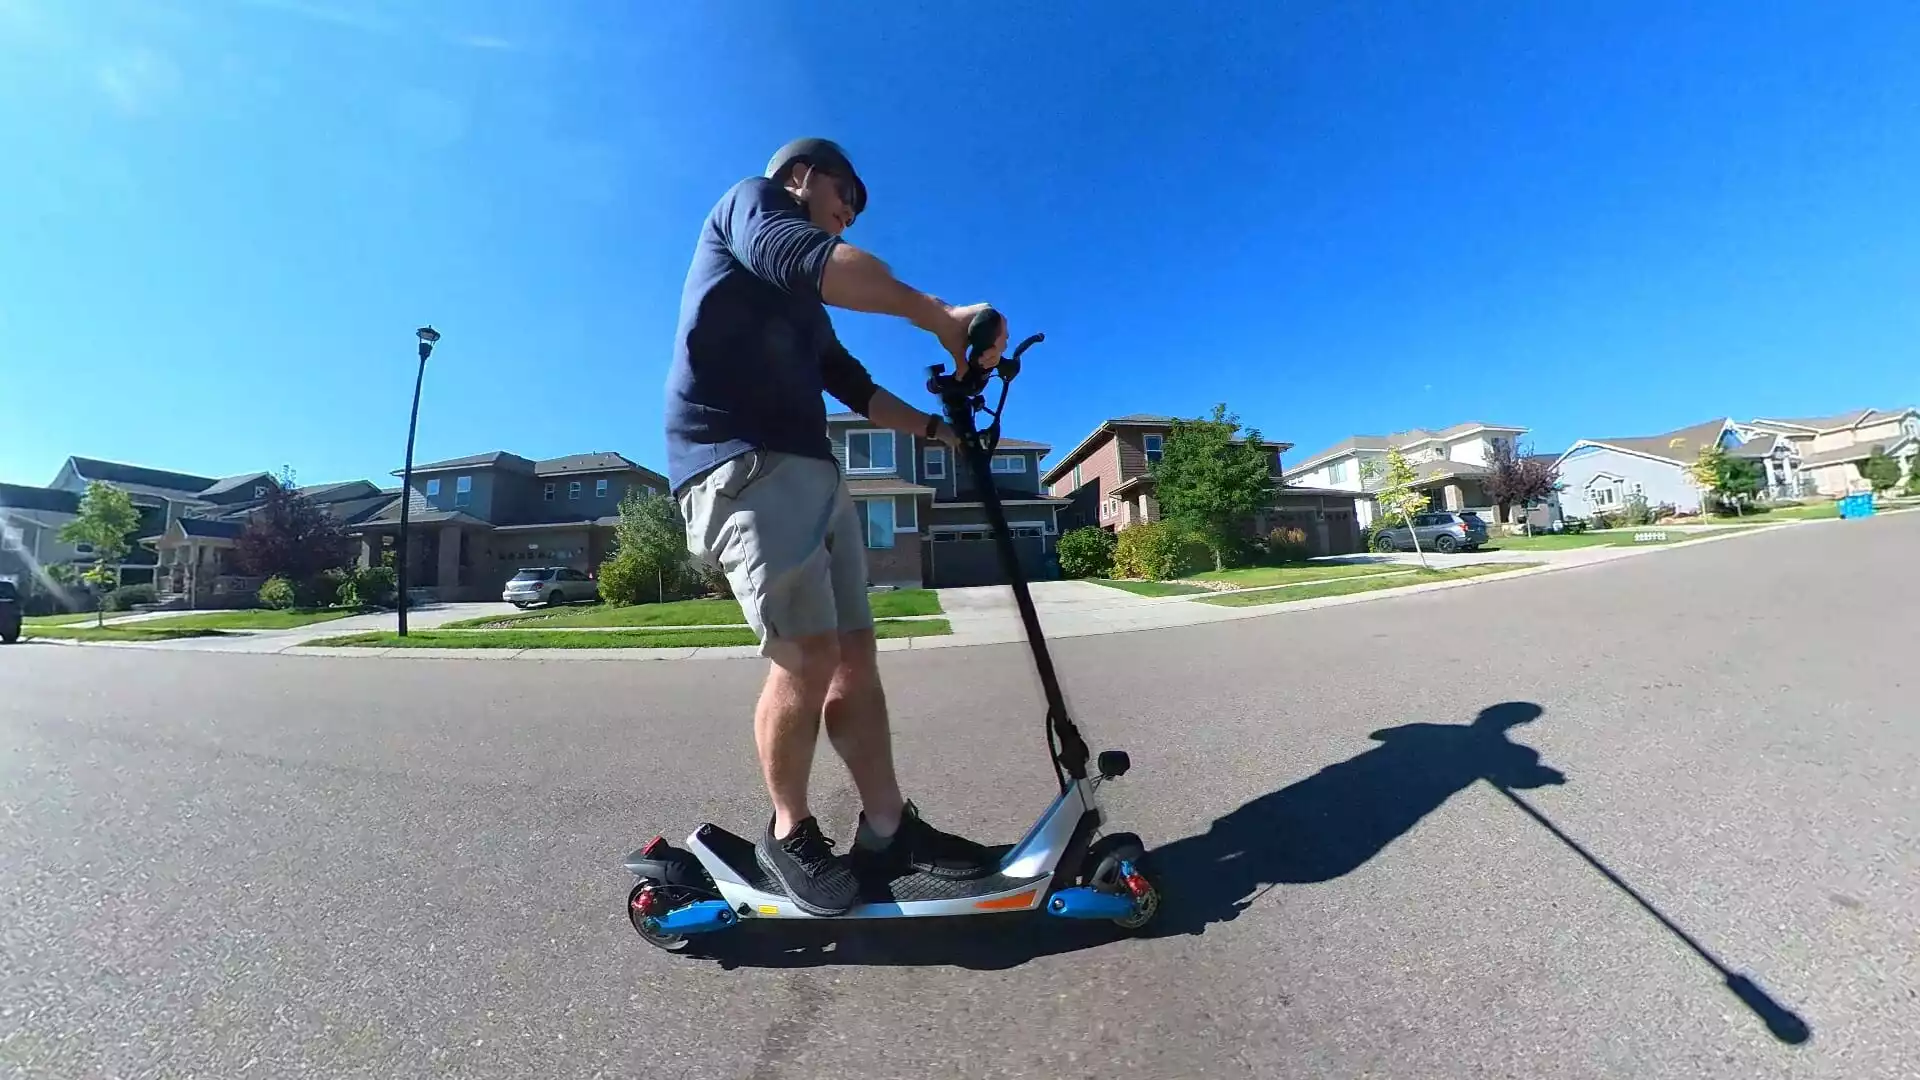 Varla Scooter: Amazingly fun scooters